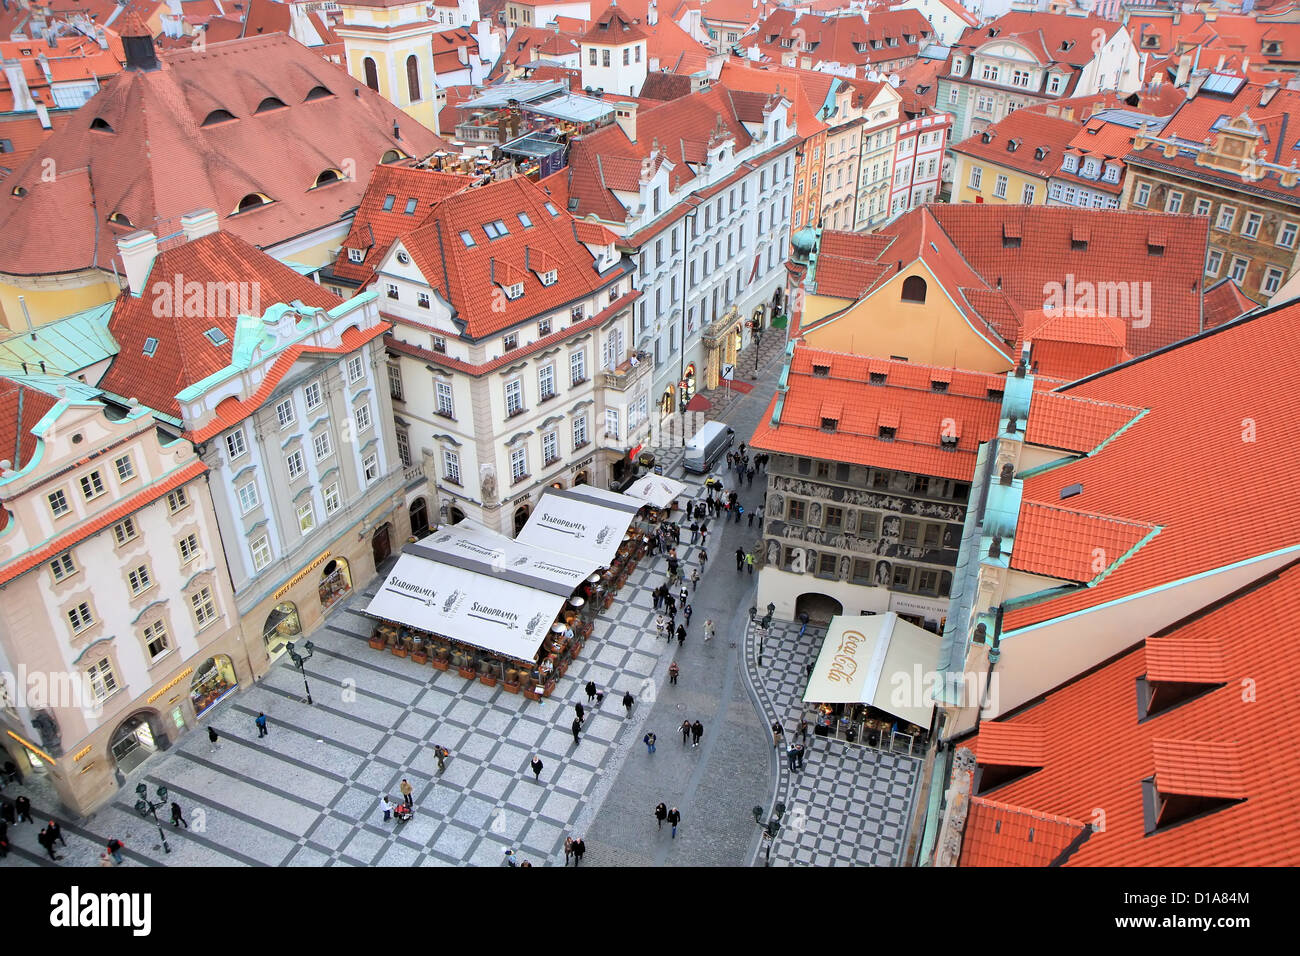 Aerial view of old town square, Prague, Czech Republic Stock Photo